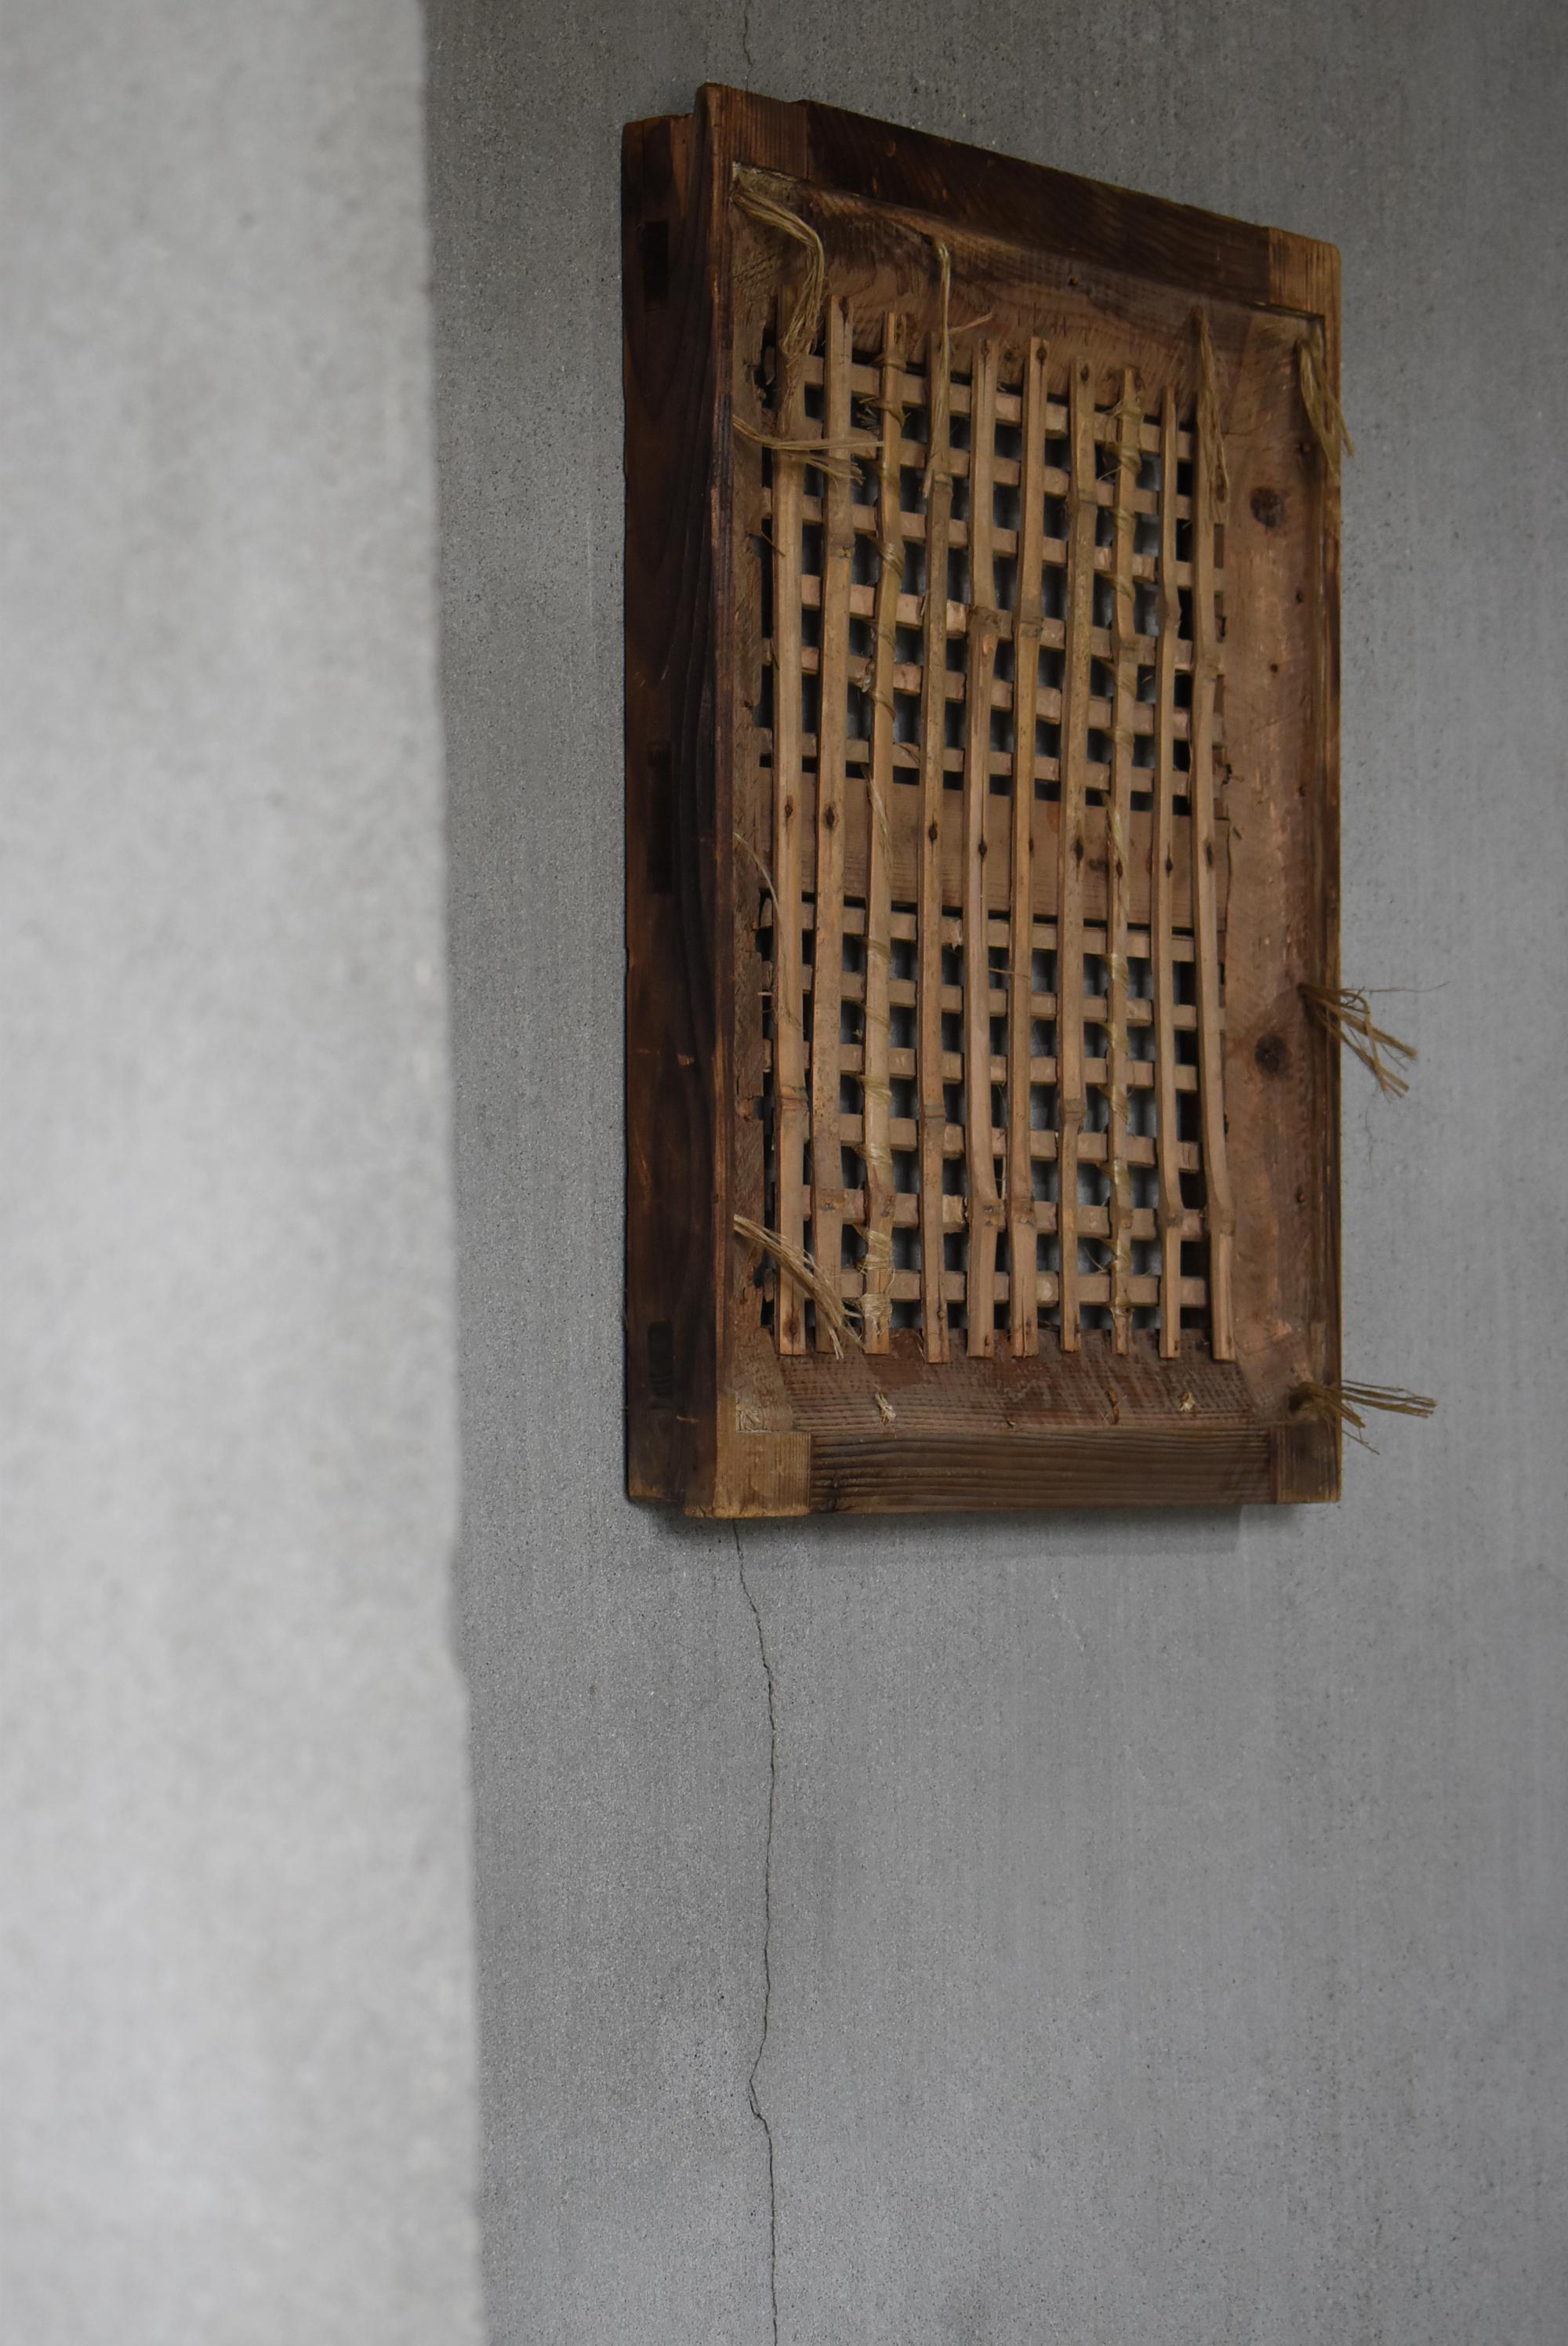 This was a very old Japanese warehouse (kura) window sliding door.
It was made during the Meiji period (1860s-1900s).
The frame is made of cedar wood and the lattice is bamboo.

It was plastered at the time.
However, over time, the plaster has